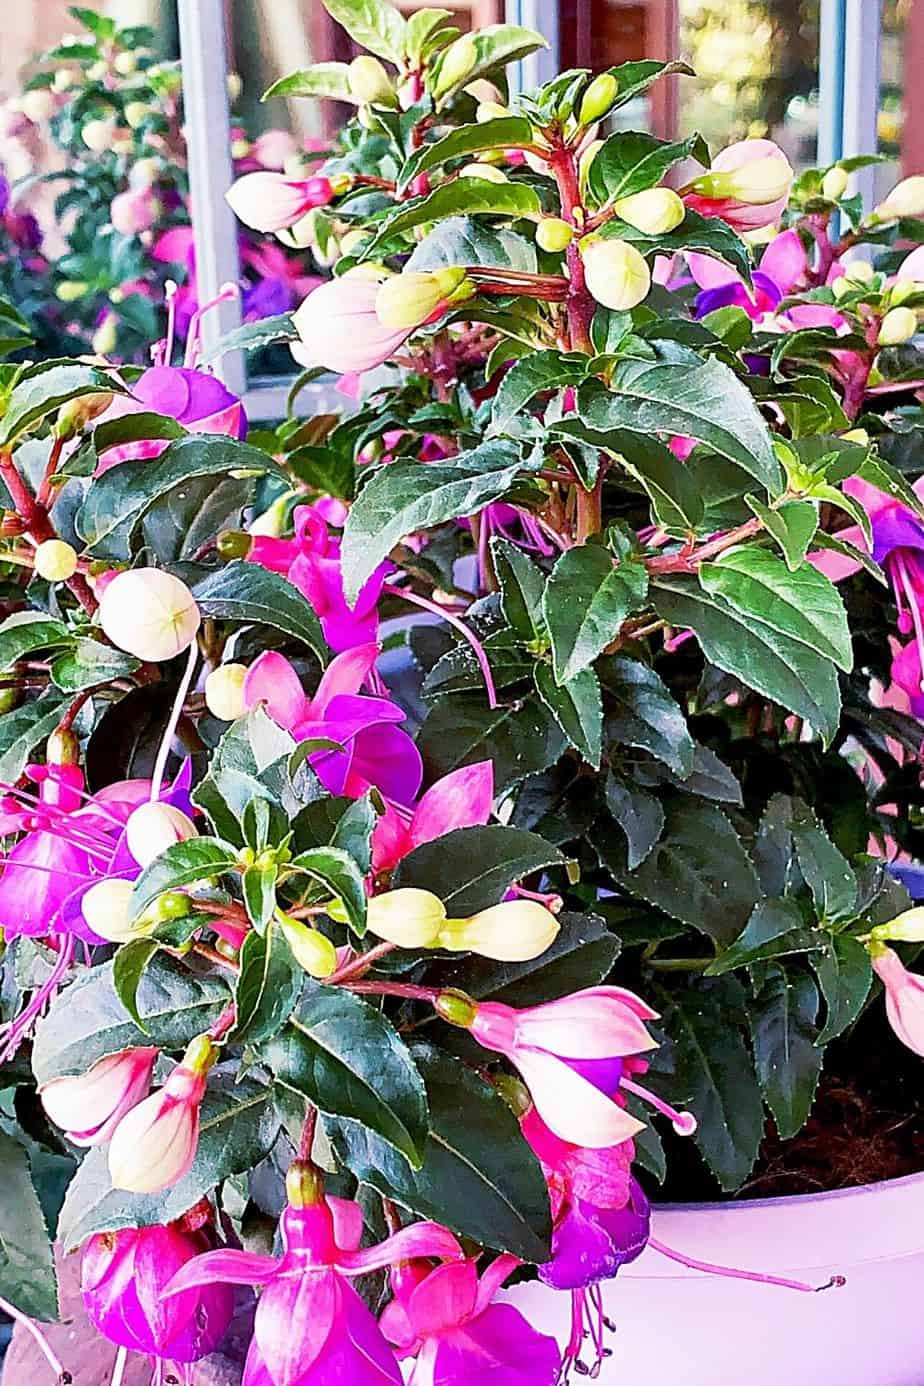 Fuchsia is a decorative plant that you can place inside hanging baskets on your north-facing balcony